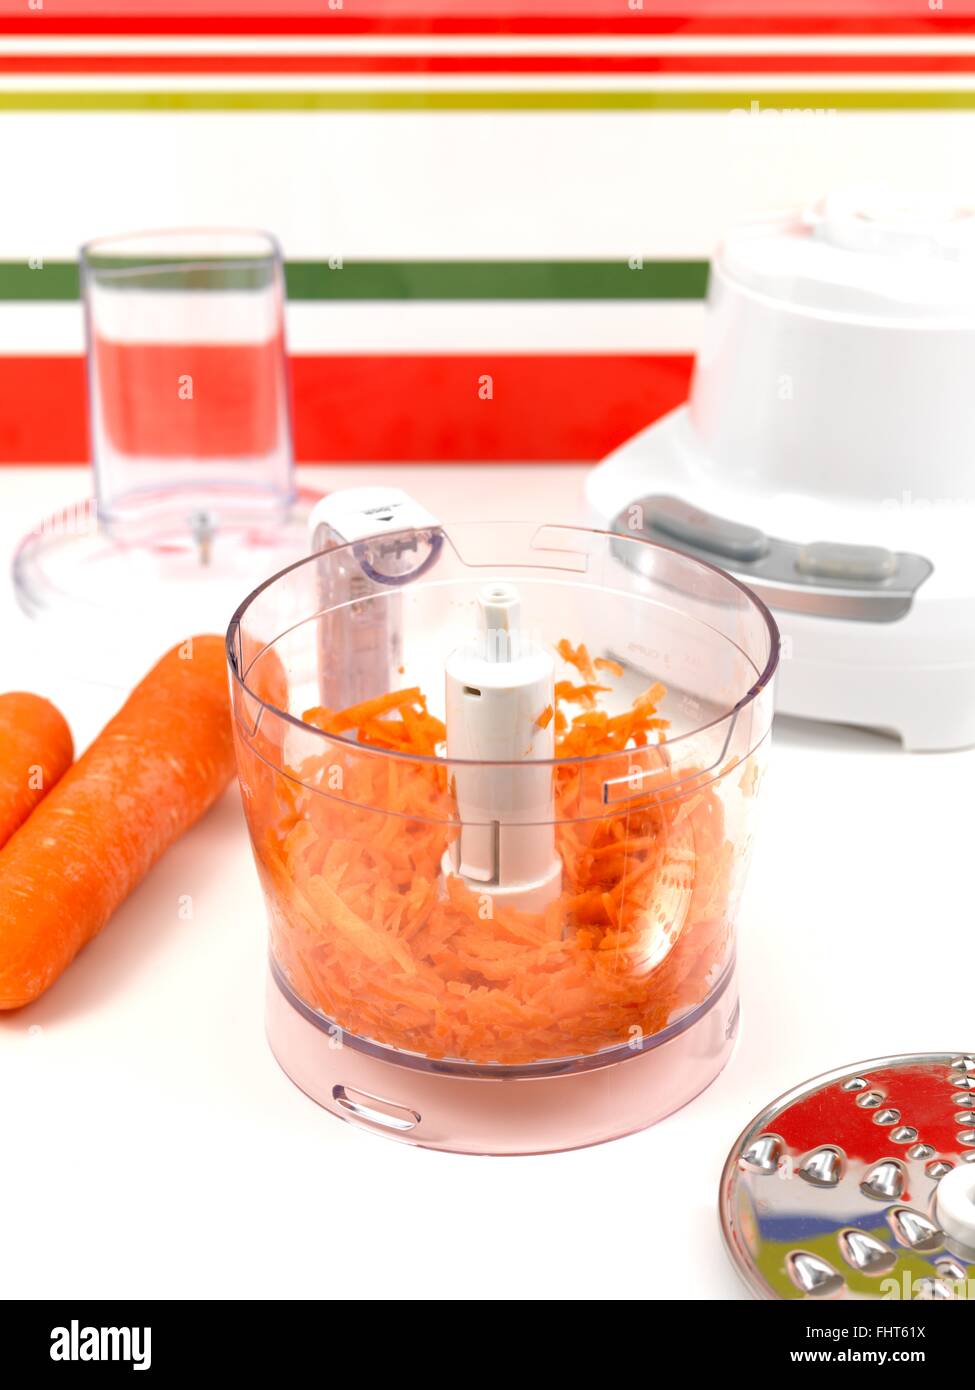 Grinding Carrots Using An Electric Food Processor Stock Photo